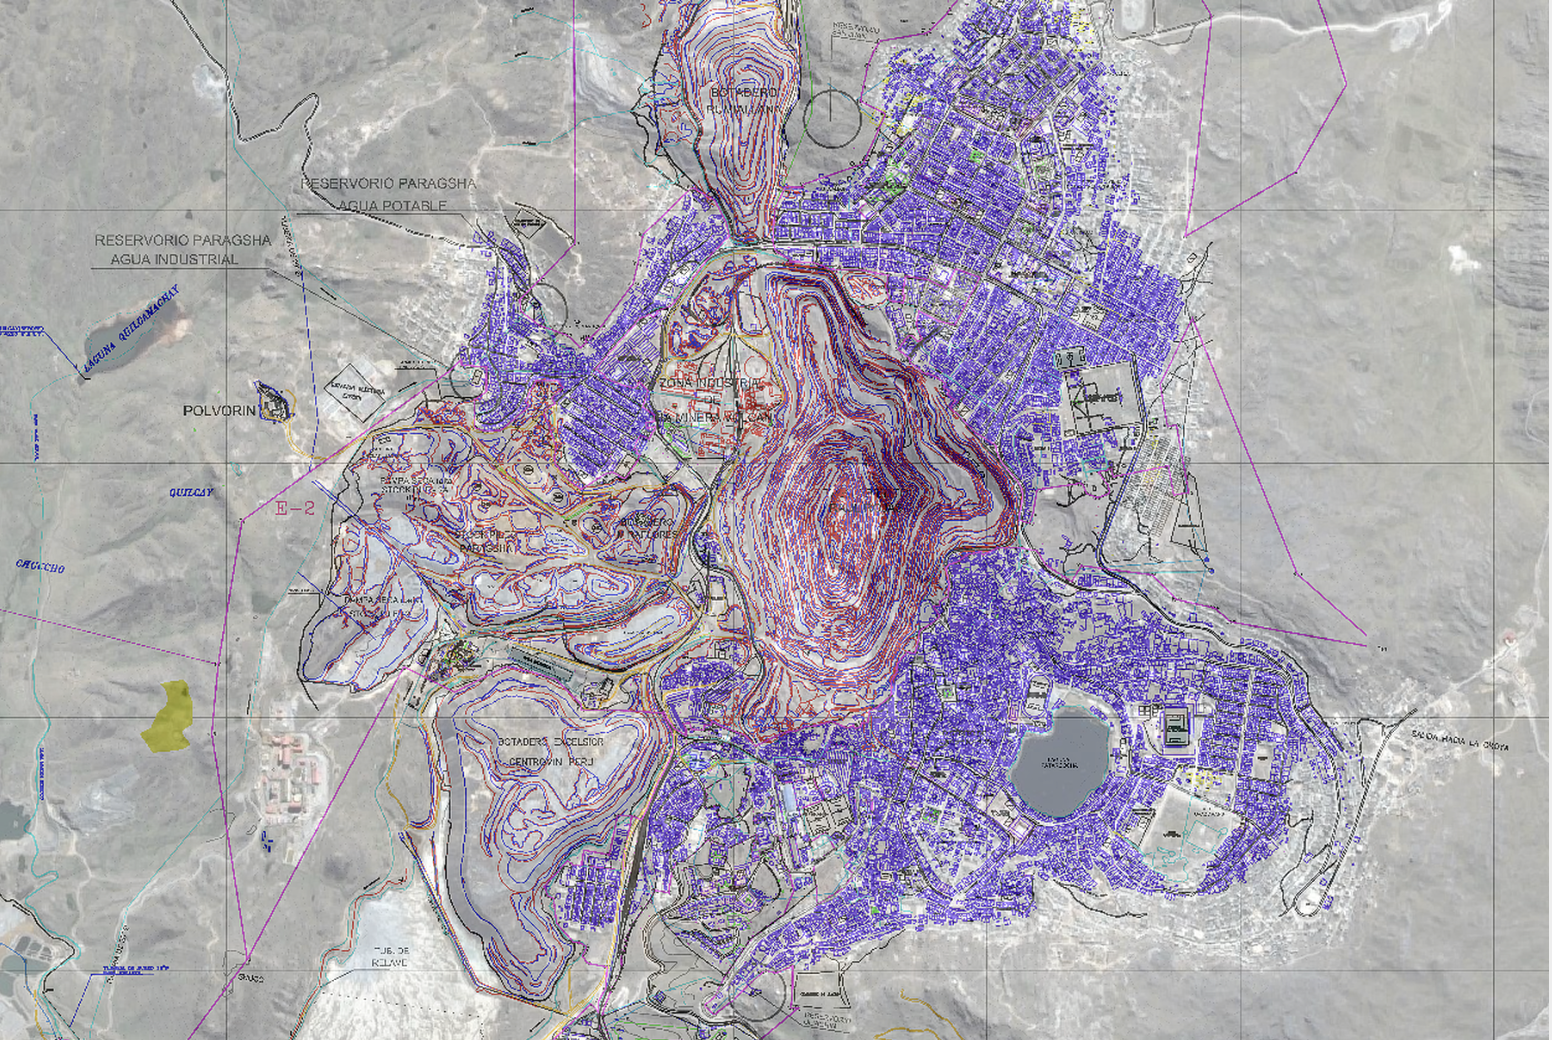 An aerial image of a town with a large manmade pit in the center. The image has many areas highlighted in purple.